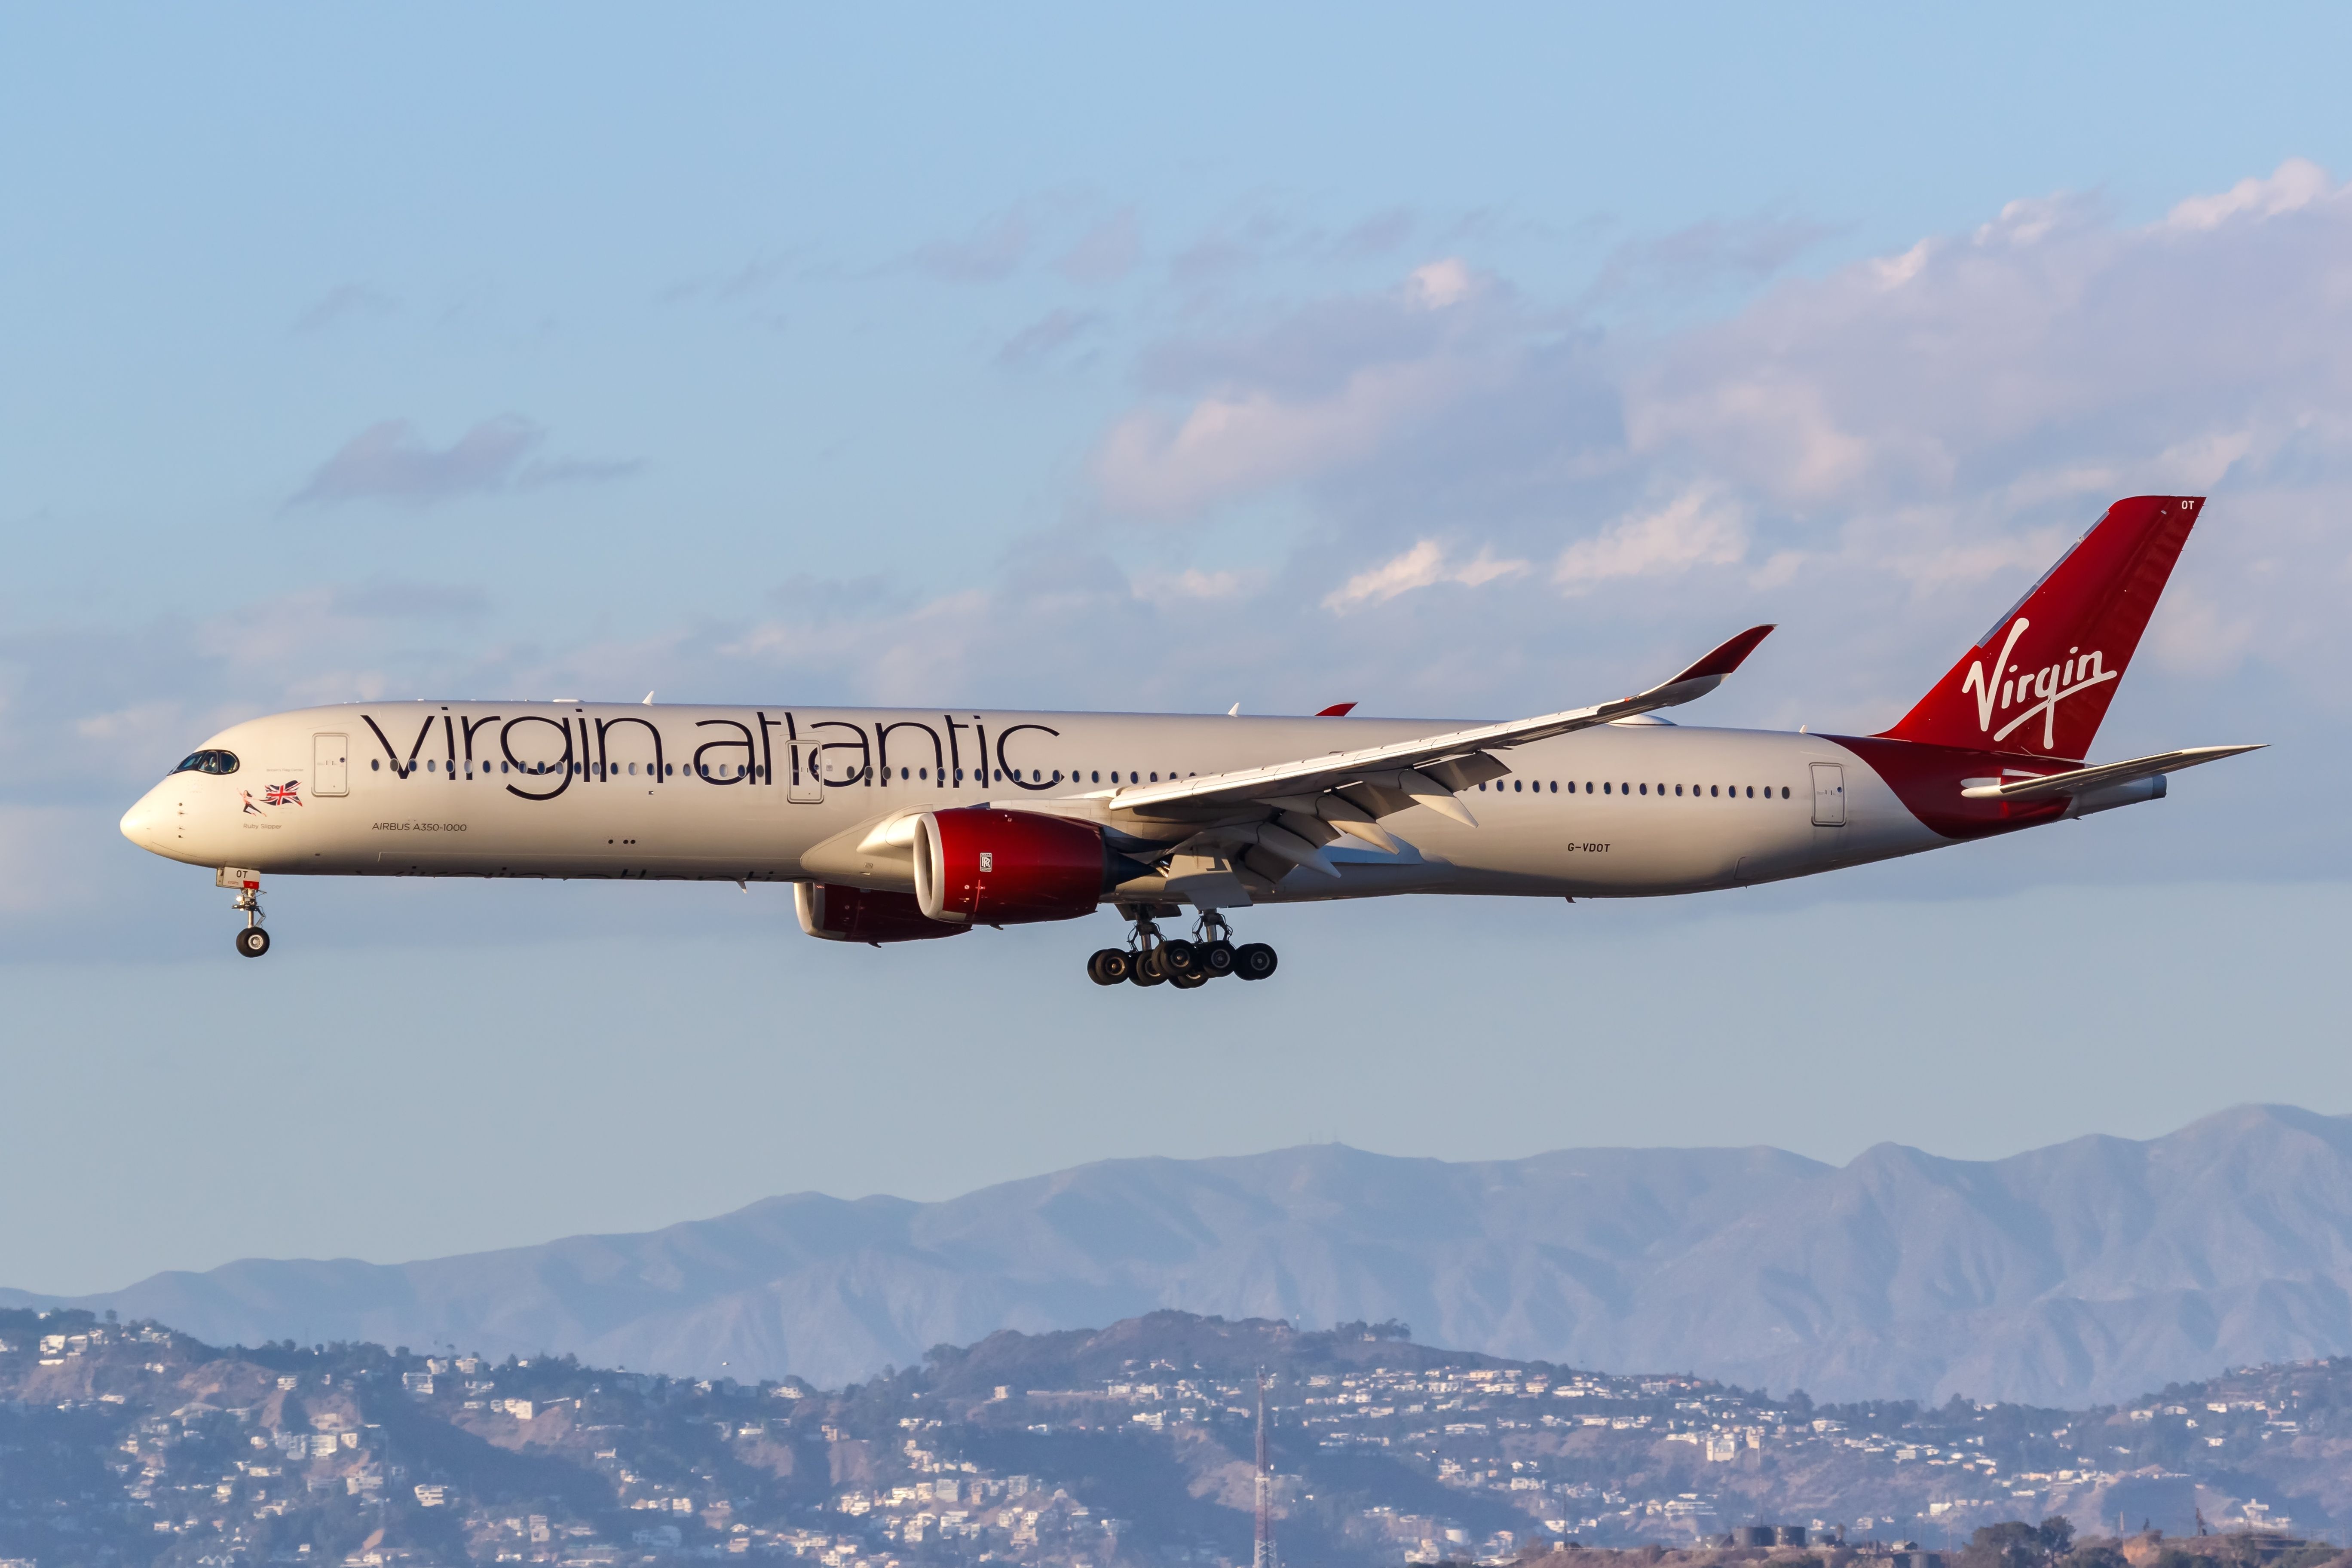 Virgin Atlantic Airbus A350-1000 airplane at Los Angeles airport (LAX) in the United States.